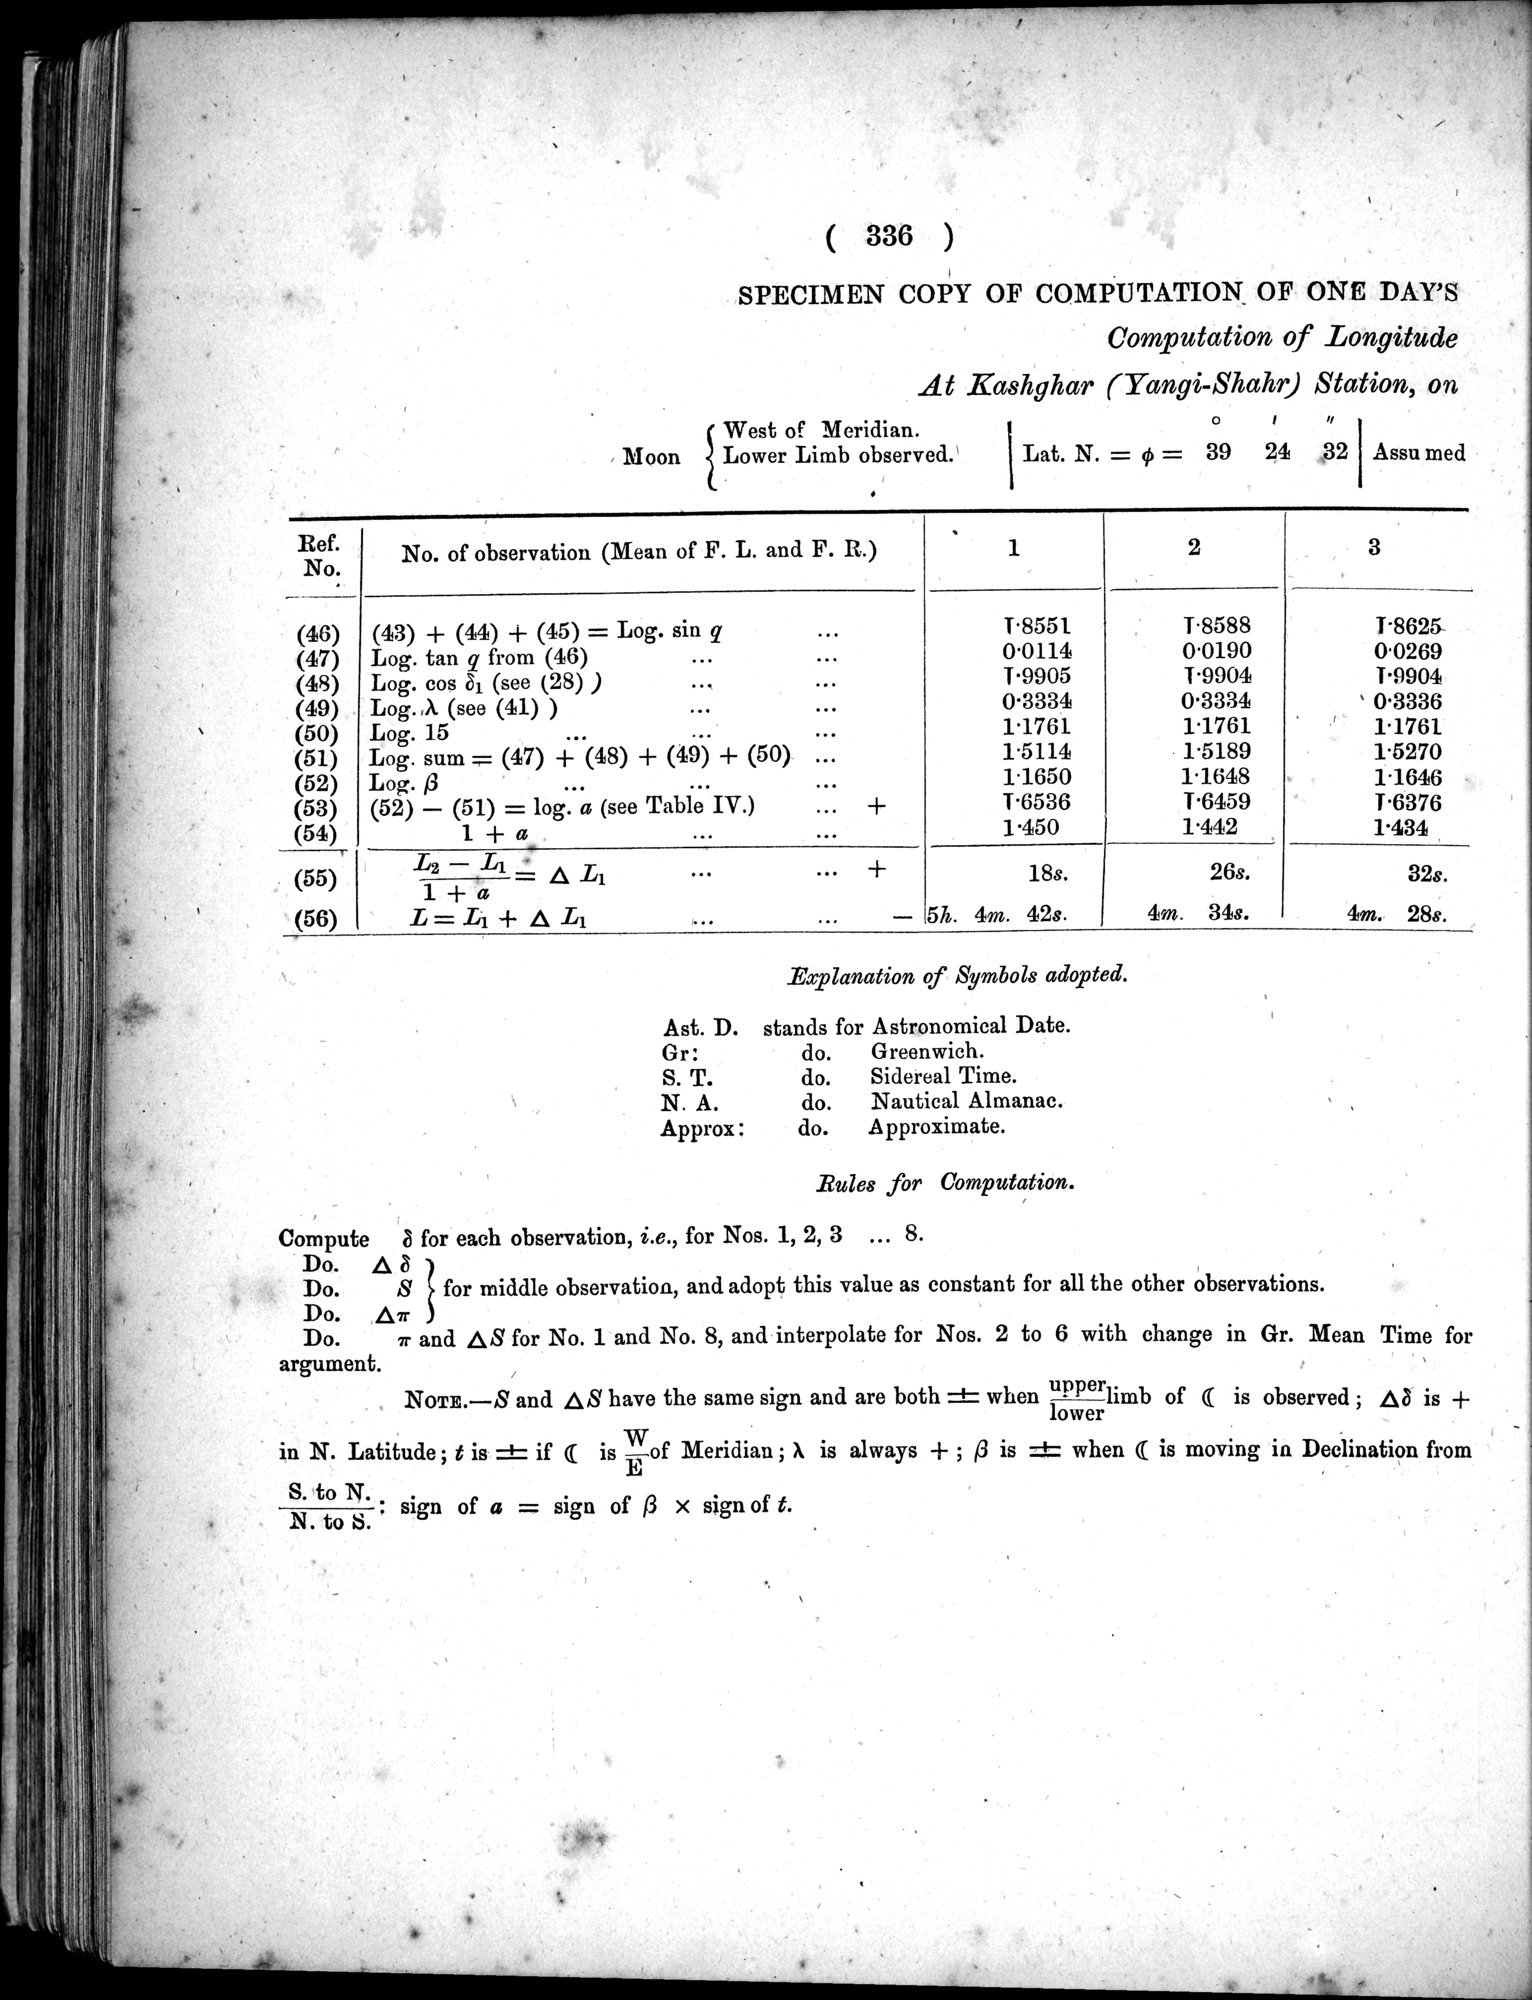 Report of a Mission to Yarkund in 1873 : vol.1 / Page 470 (Grayscale High Resolution Image)